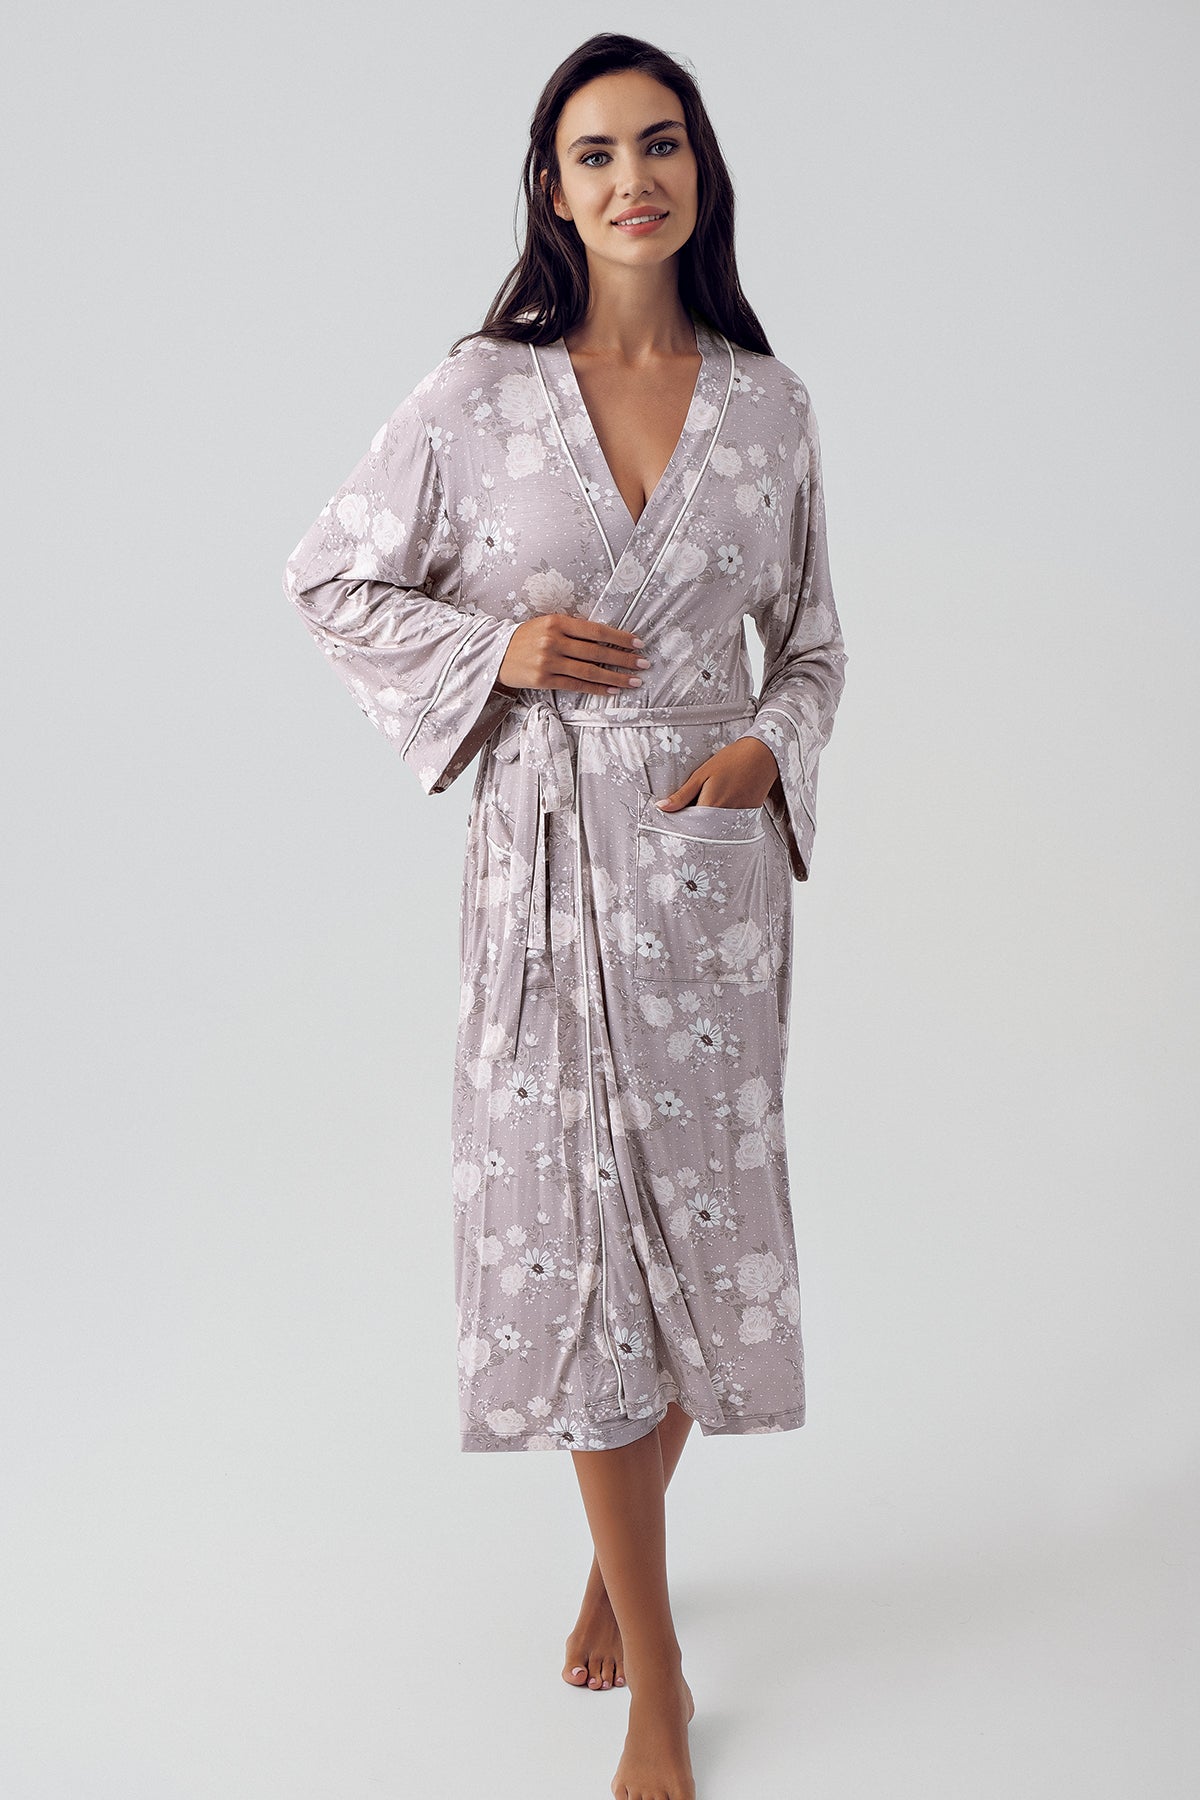 Shopymommy 15304 Polka Dot 3-Pieces Maternity & Nursing Pajamas With Flower Patterned Robe Coffee